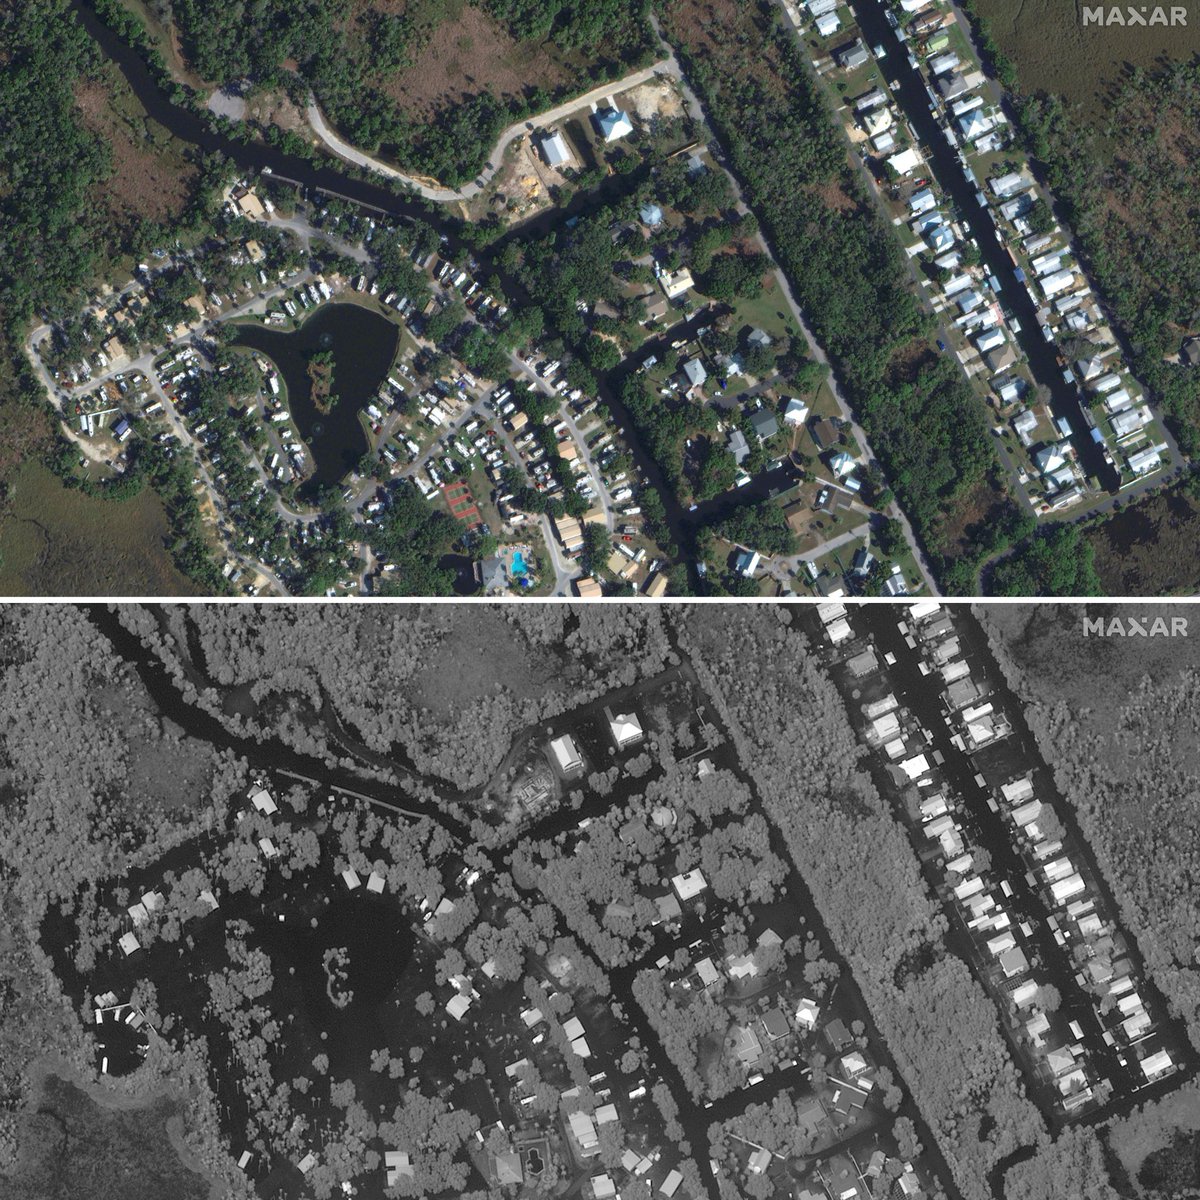 Satellite images taken before and after Hurricane Idalia show the devastating storm surge in Citrus County